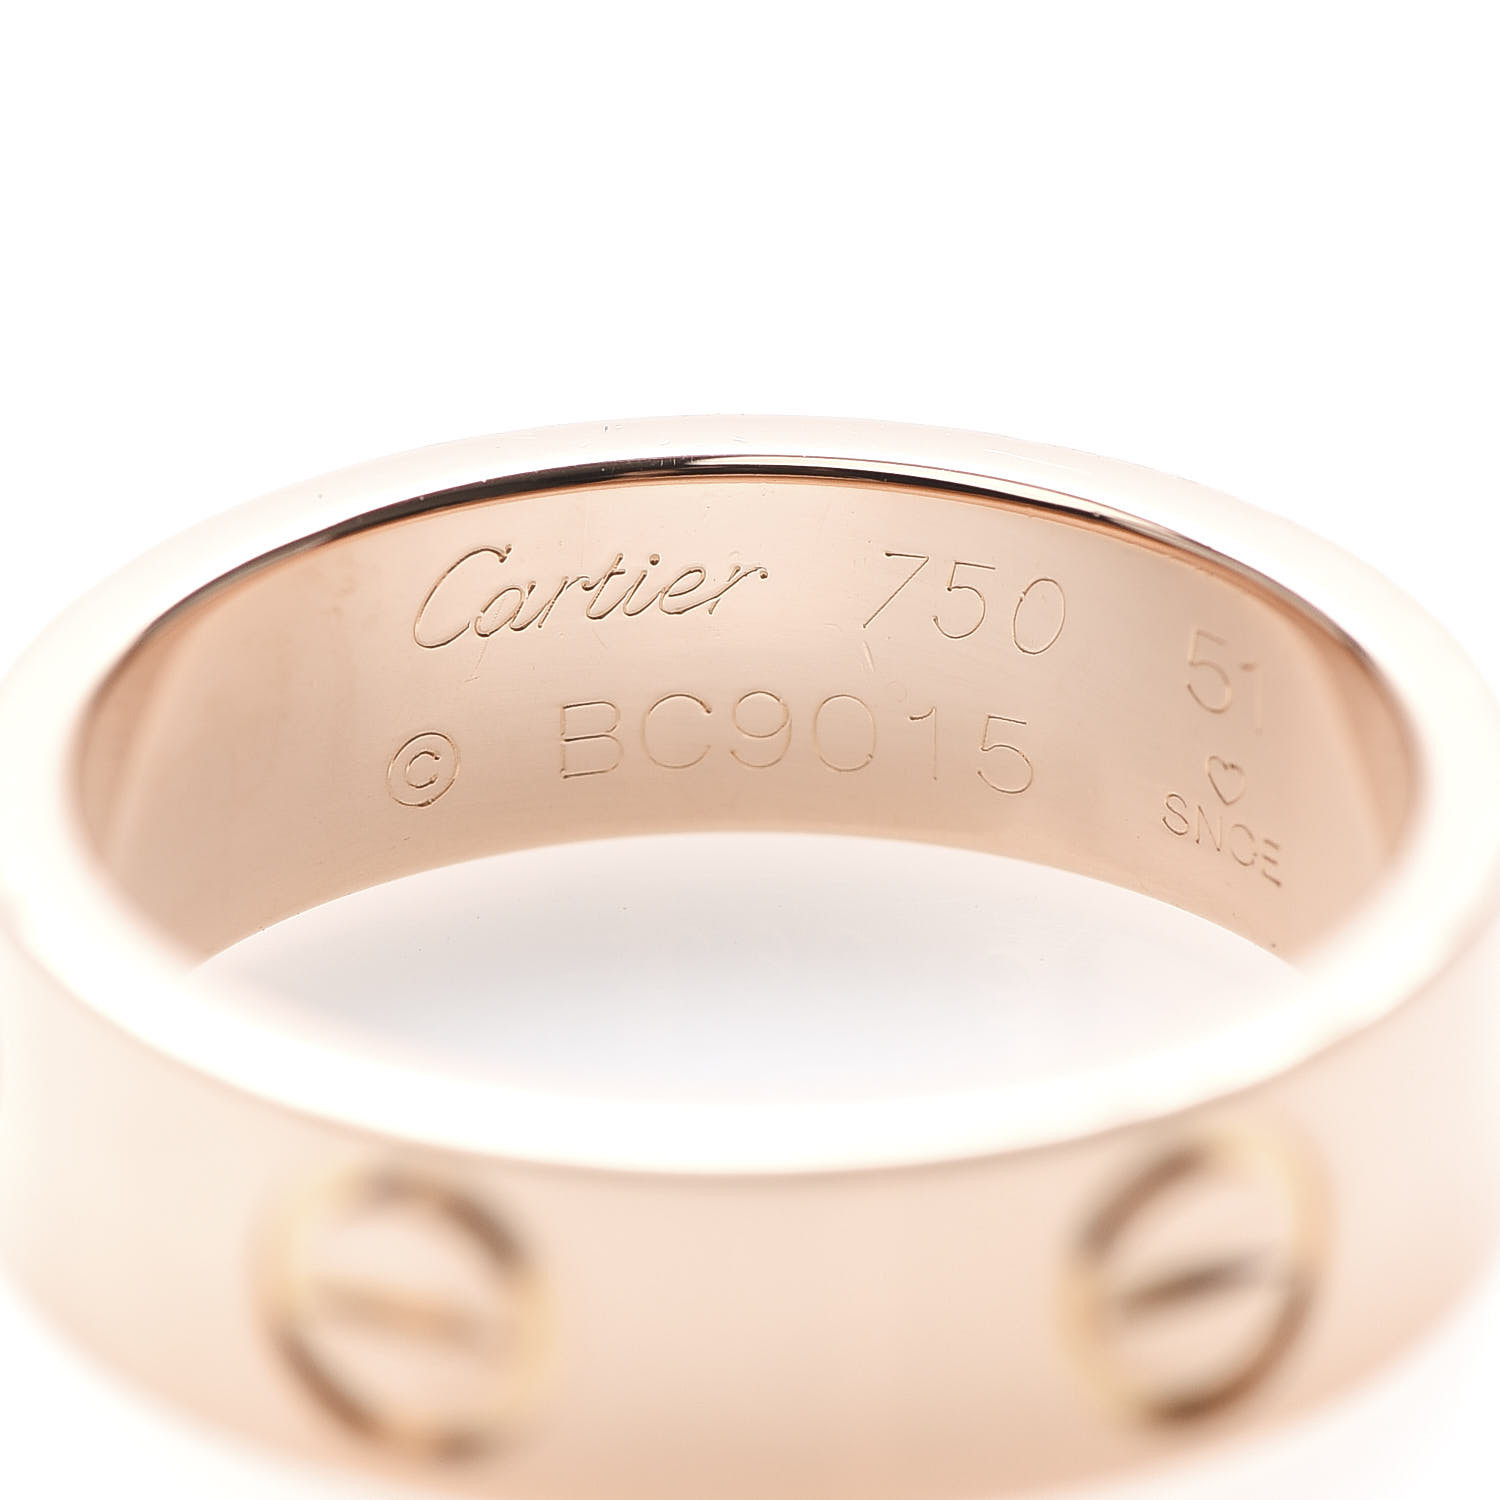 CARTIER 18K Pink Gold 5.5mm LOVE Ring 51 5.75 552948 FASHIONPHILE